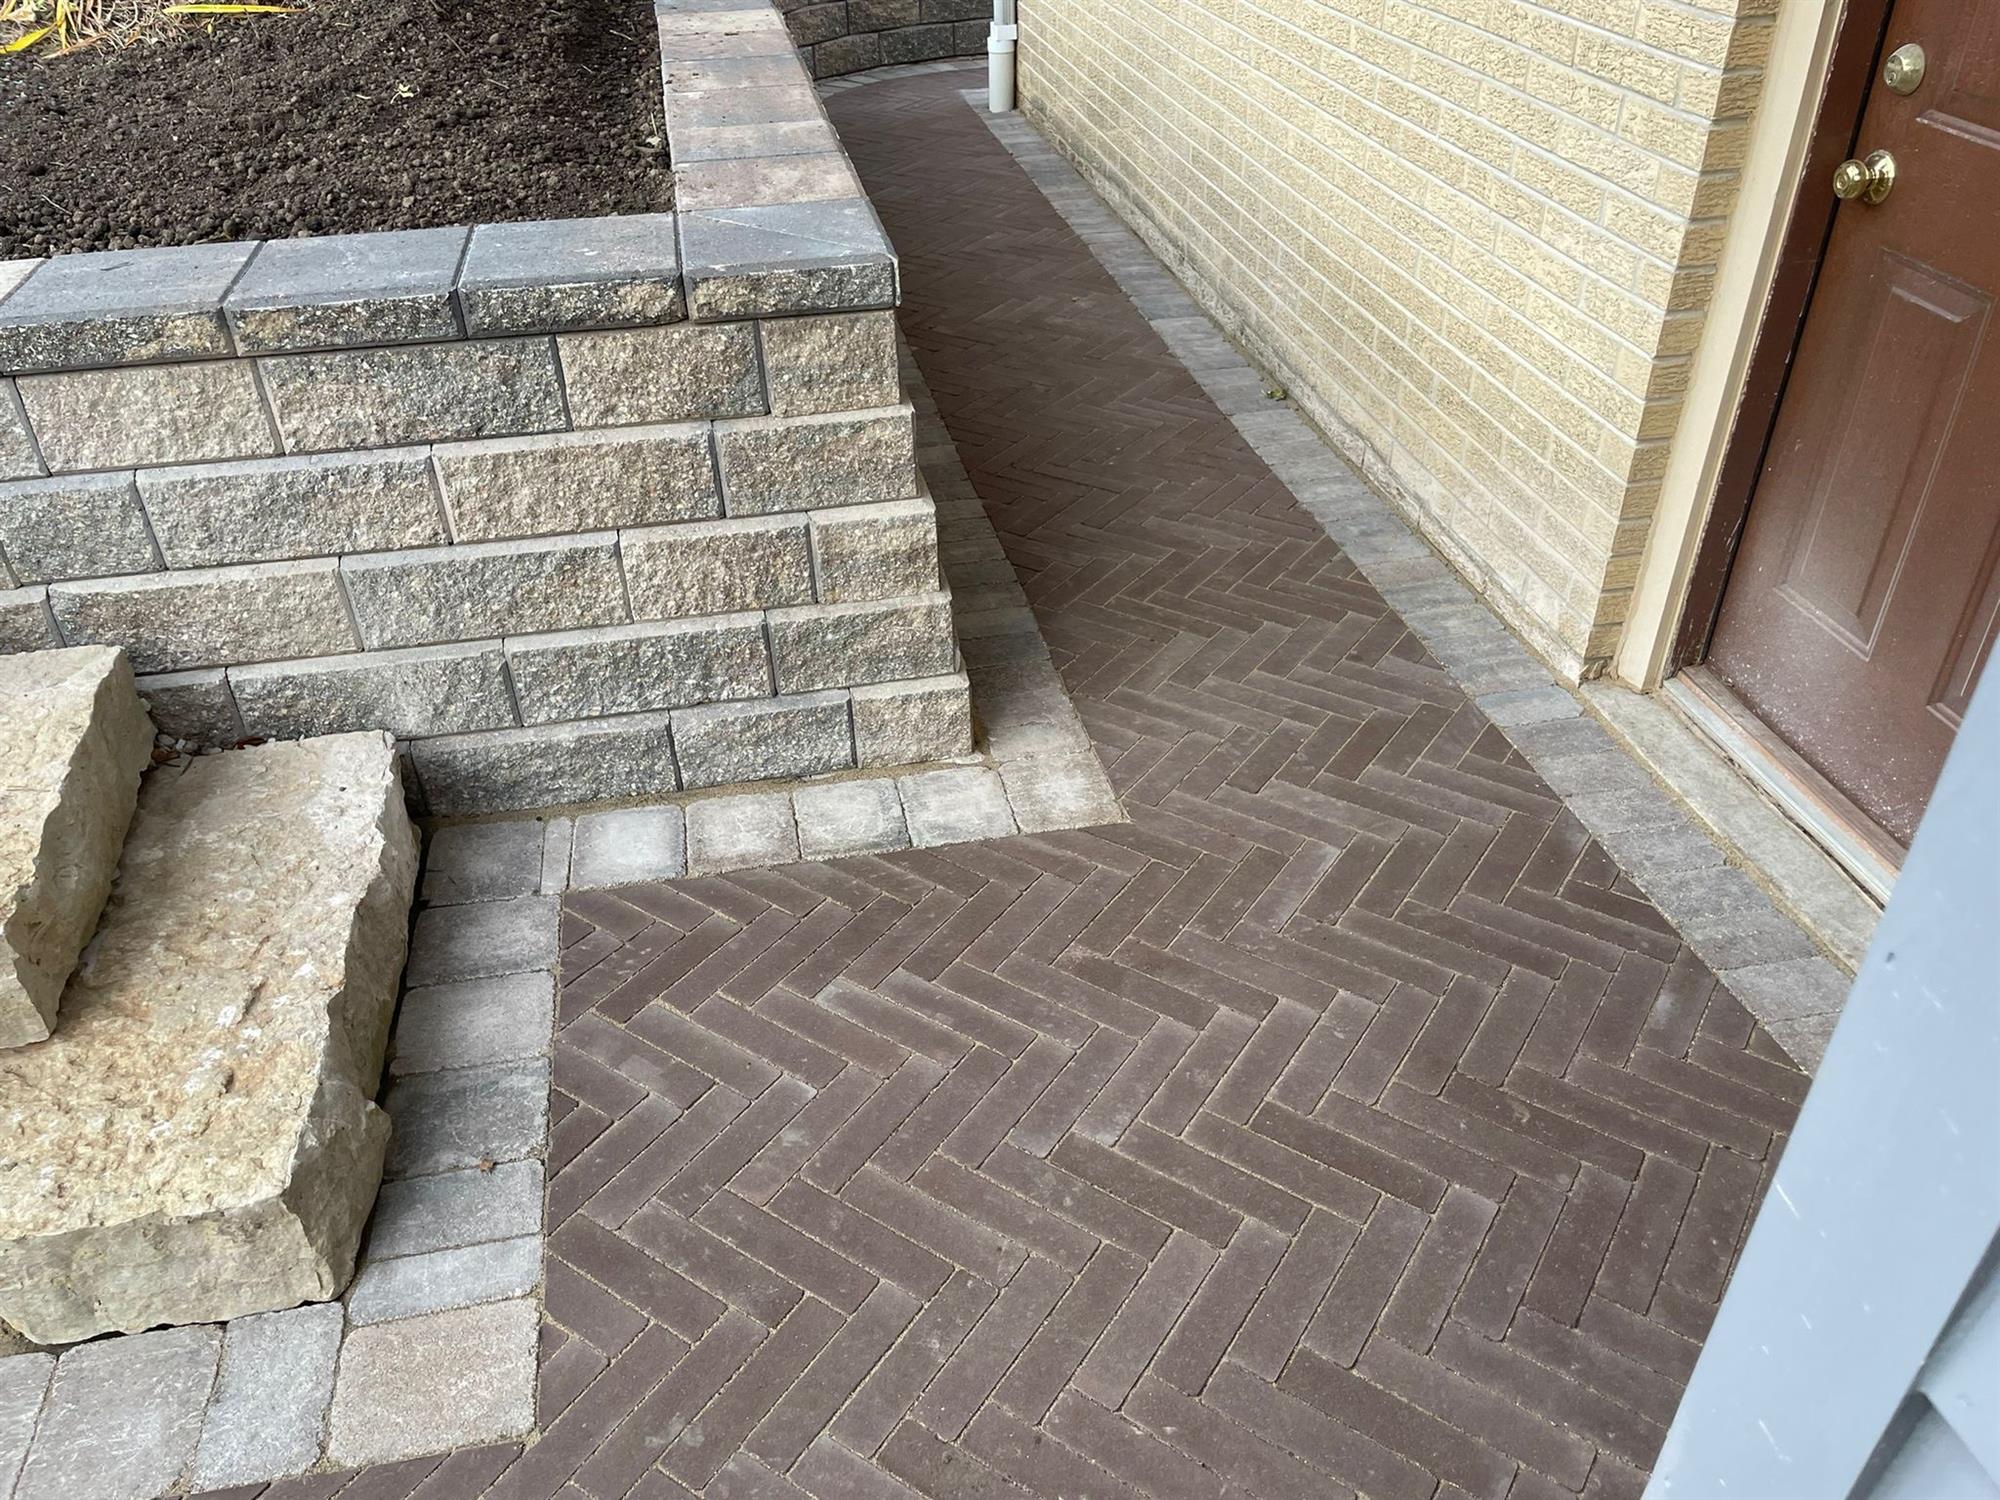 Brick and Stone Walkway around the House Covered by a Retaining Wall